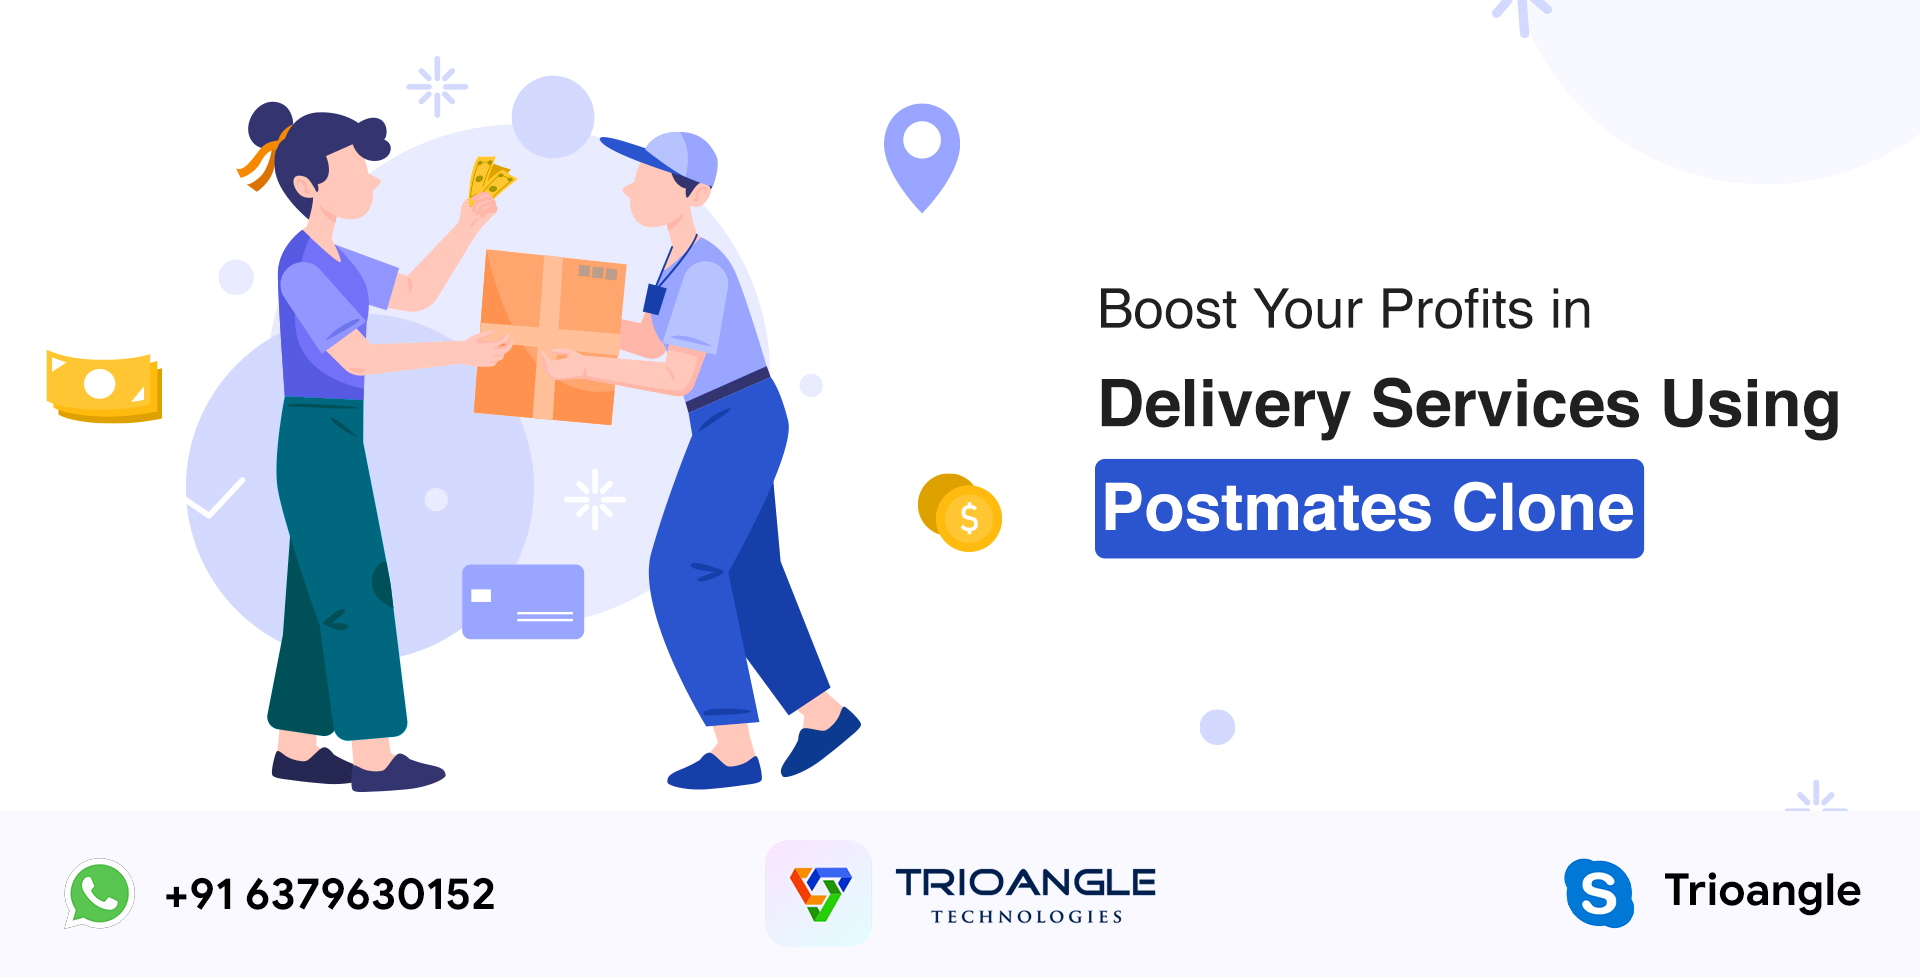 Boost your profits in Delivery Services using Postmates Clone